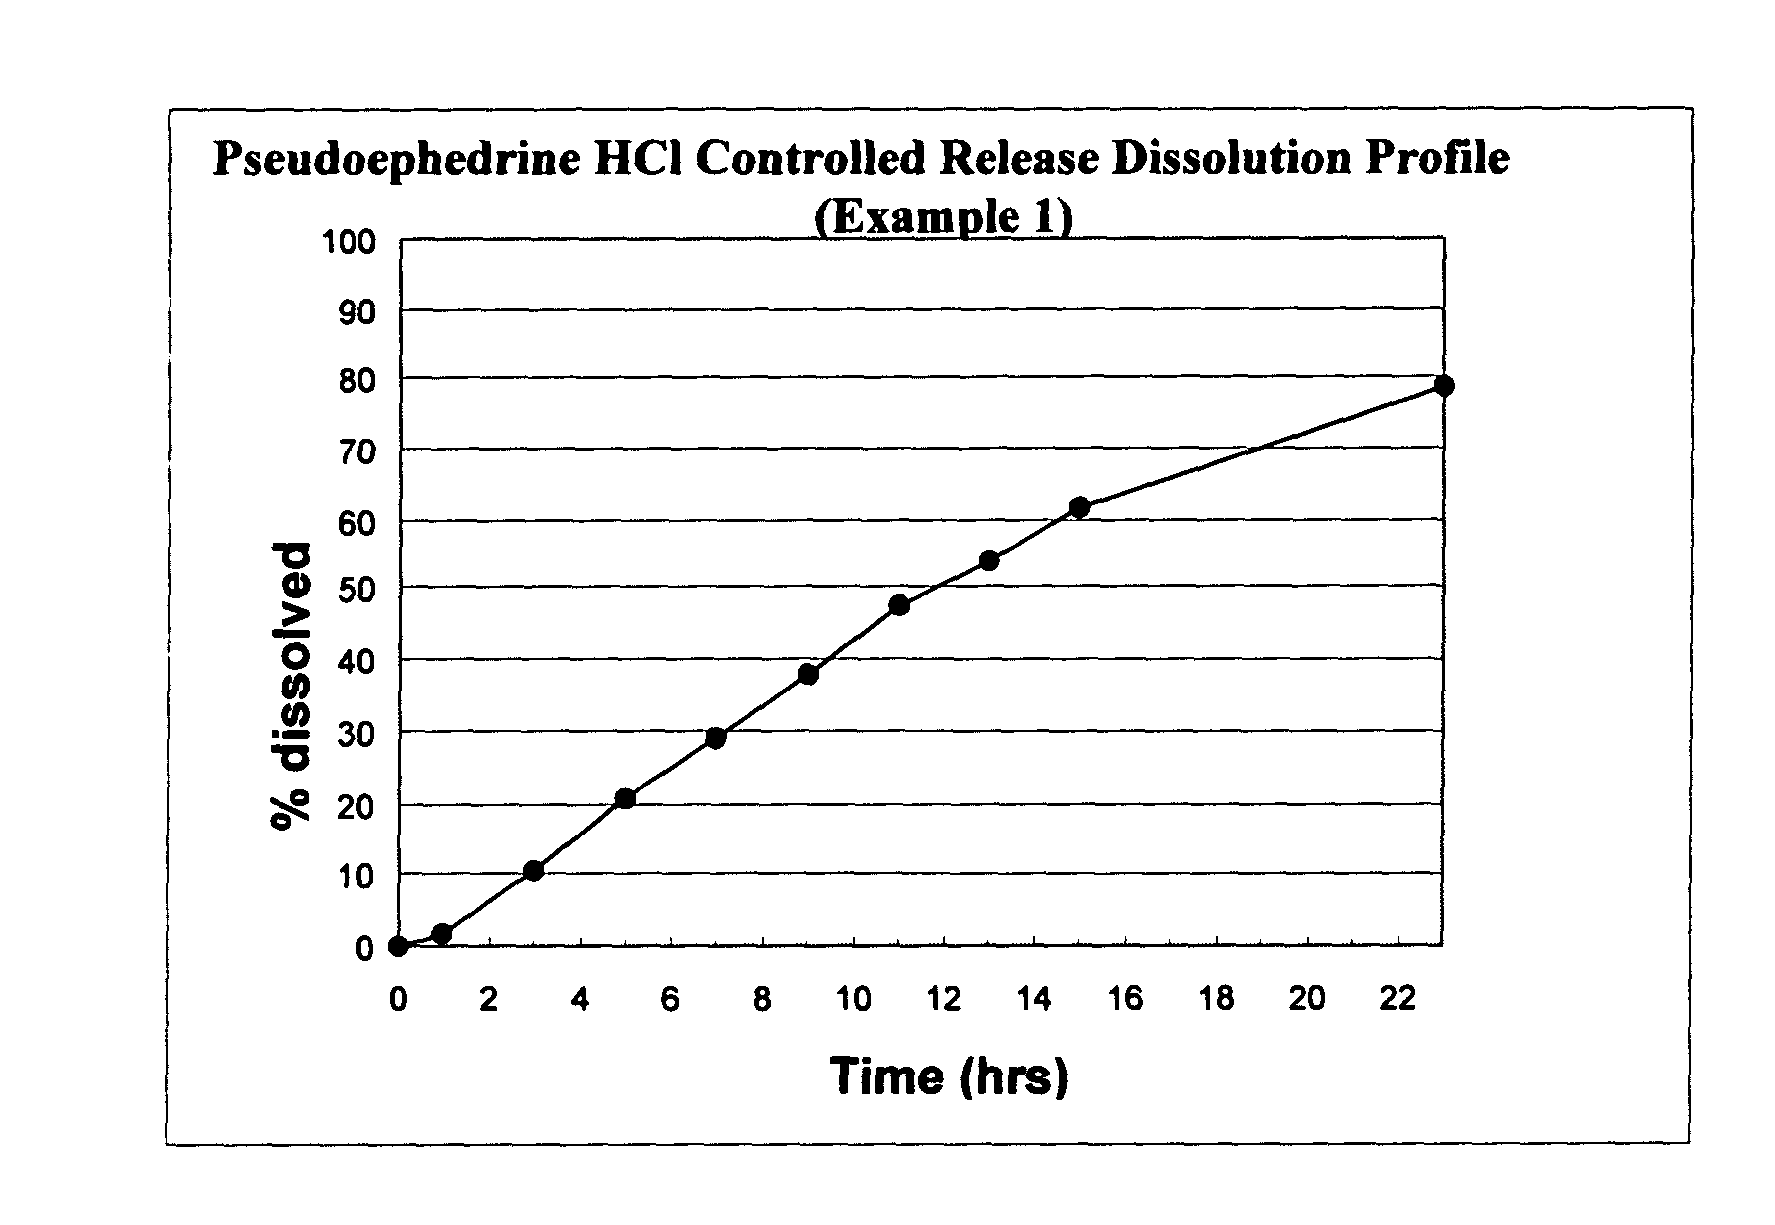 Osmotic device containing pseudoephedrine and an H1 antagonist